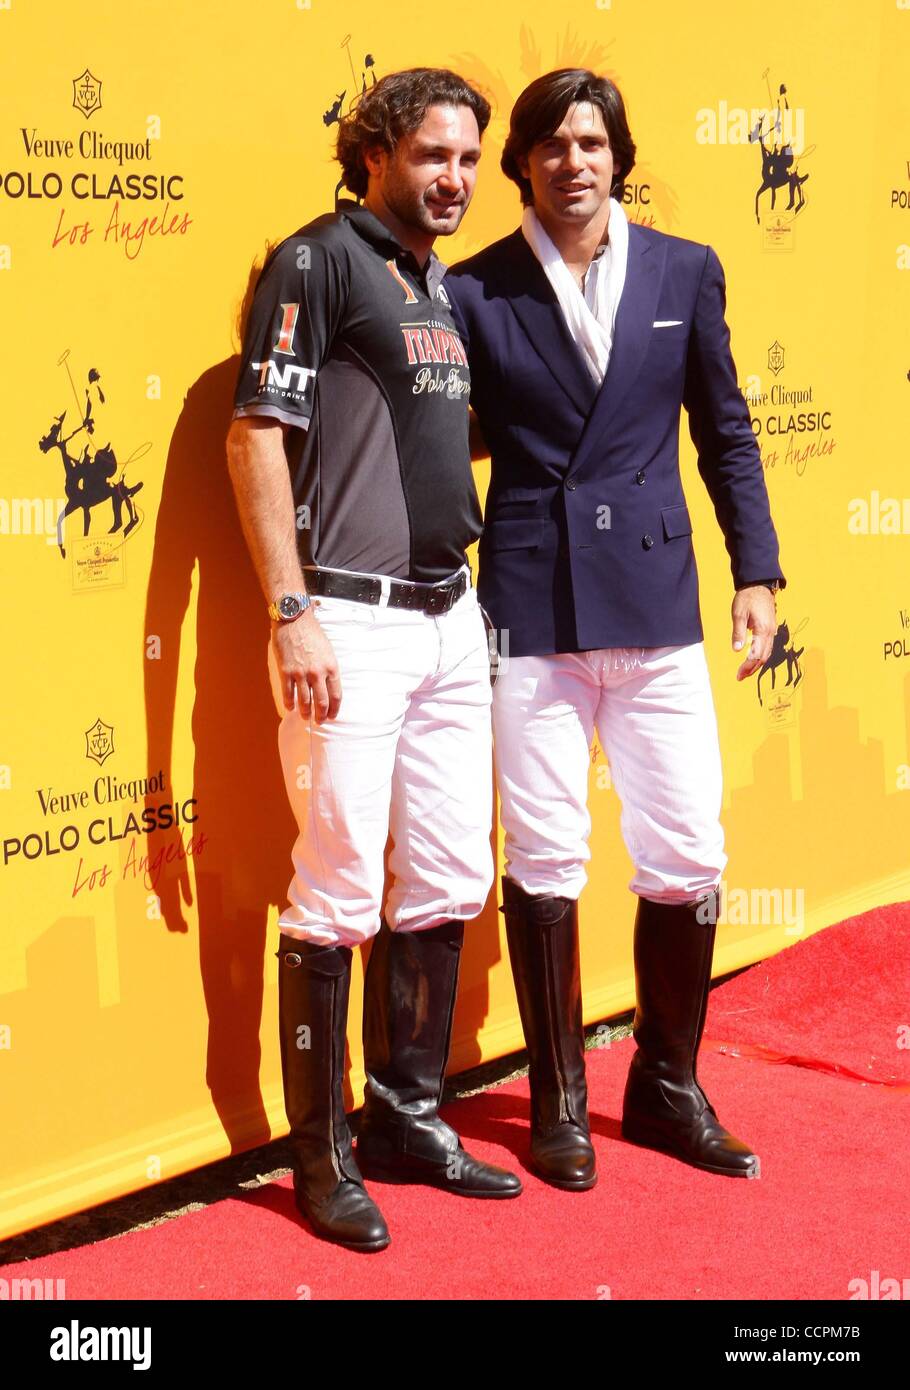 Oct. 10, 2010 - Los Angeles, California, U.S. - Rico Mansur, Nacho Figueras.Clicquot Polo Classic Los Angeles  held at Will Rogers State Park. Los Angeles 10-10-2010. K66532TL(Credit Image: Â© TLeopold/Globe Photos/ZUMApress.com) Stock Photo